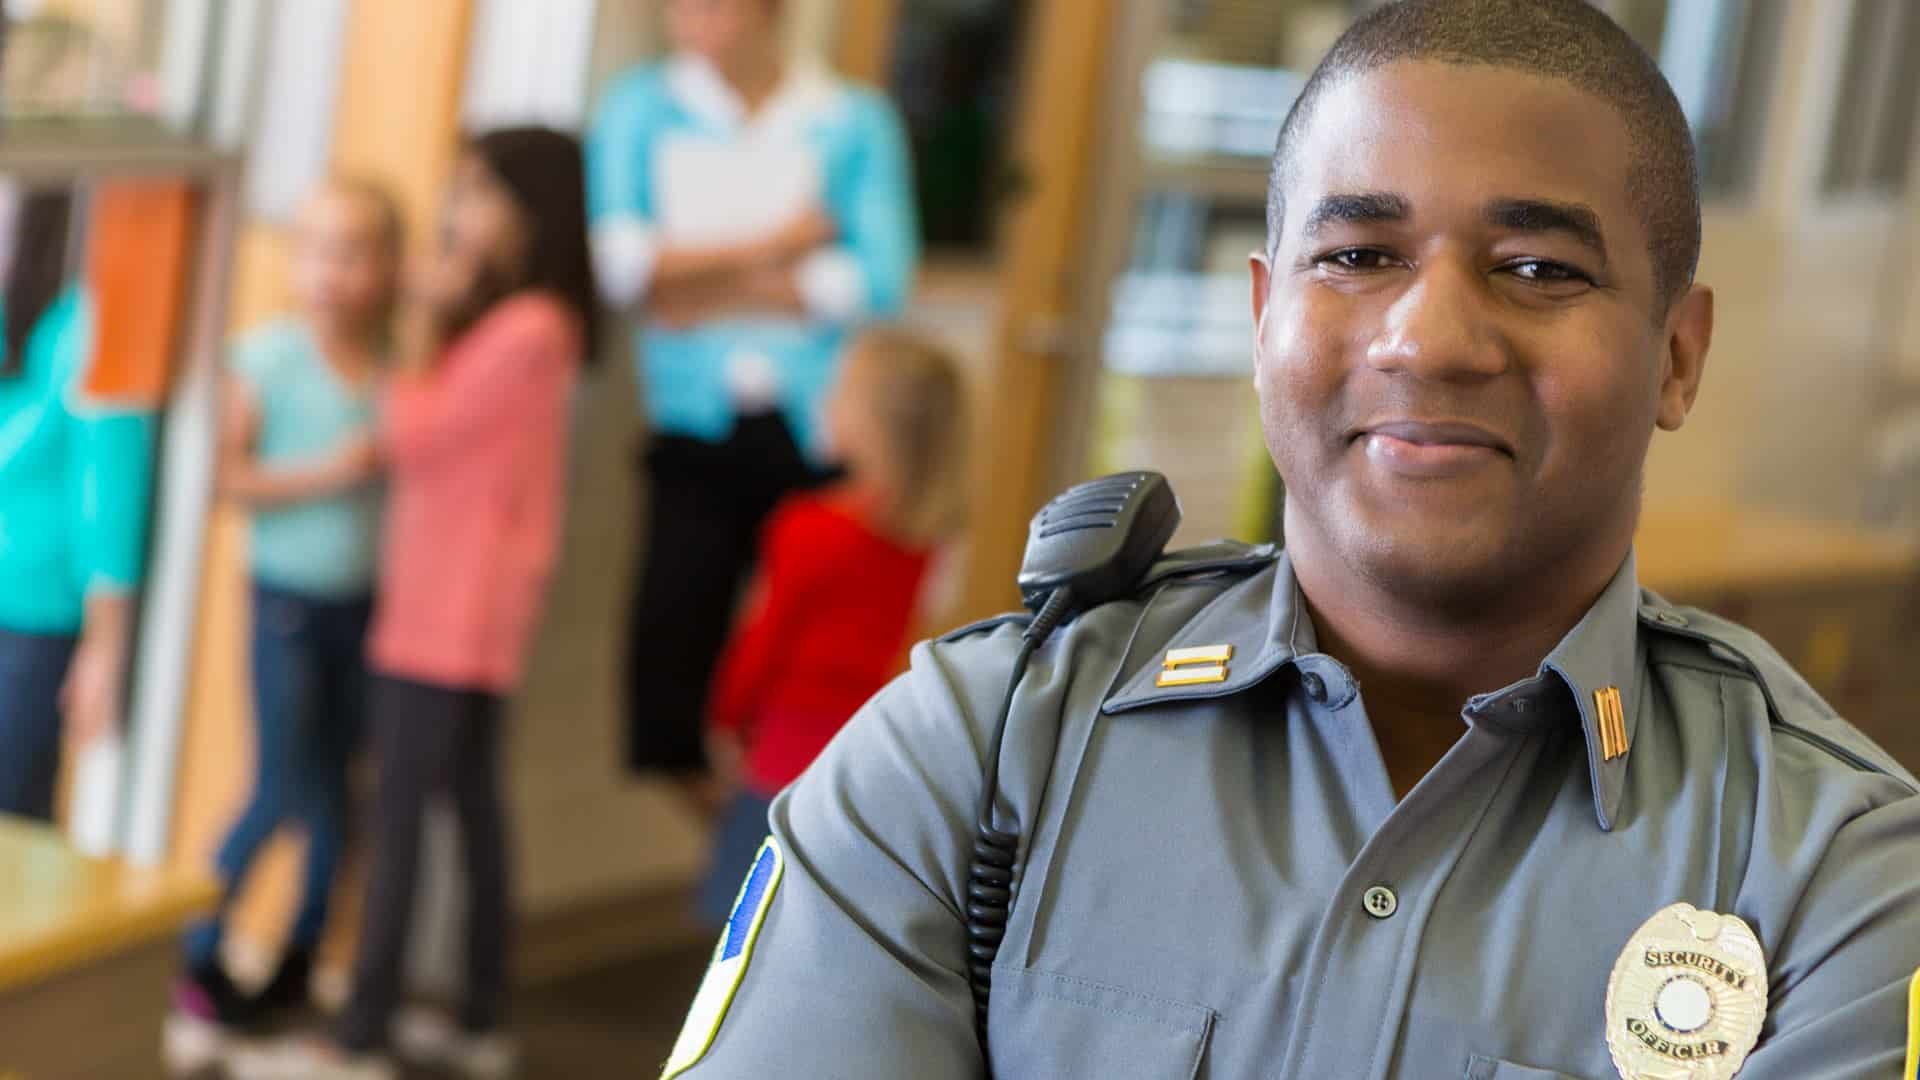 The Complete Guide to Security Guard Jobs and Why You Should Consider Becoming One